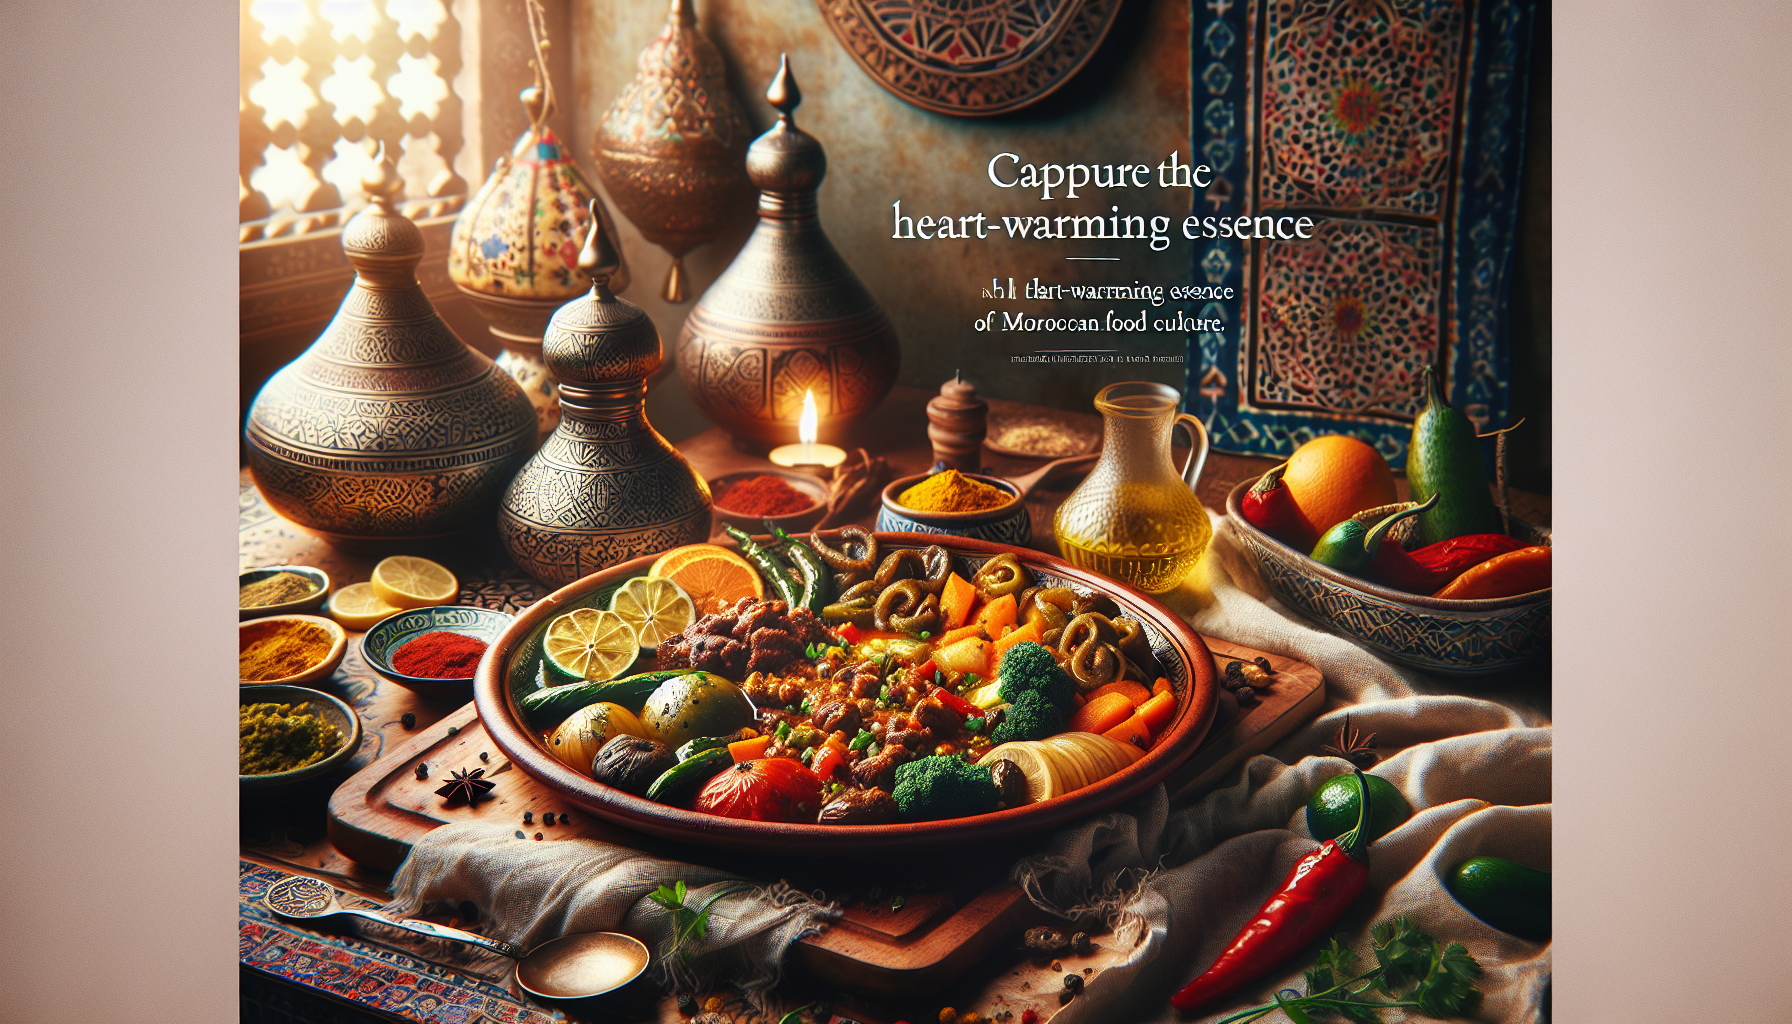 Whats Your Favorite Moroccan Comfort Dish For A Quick And Comforting Dinner?